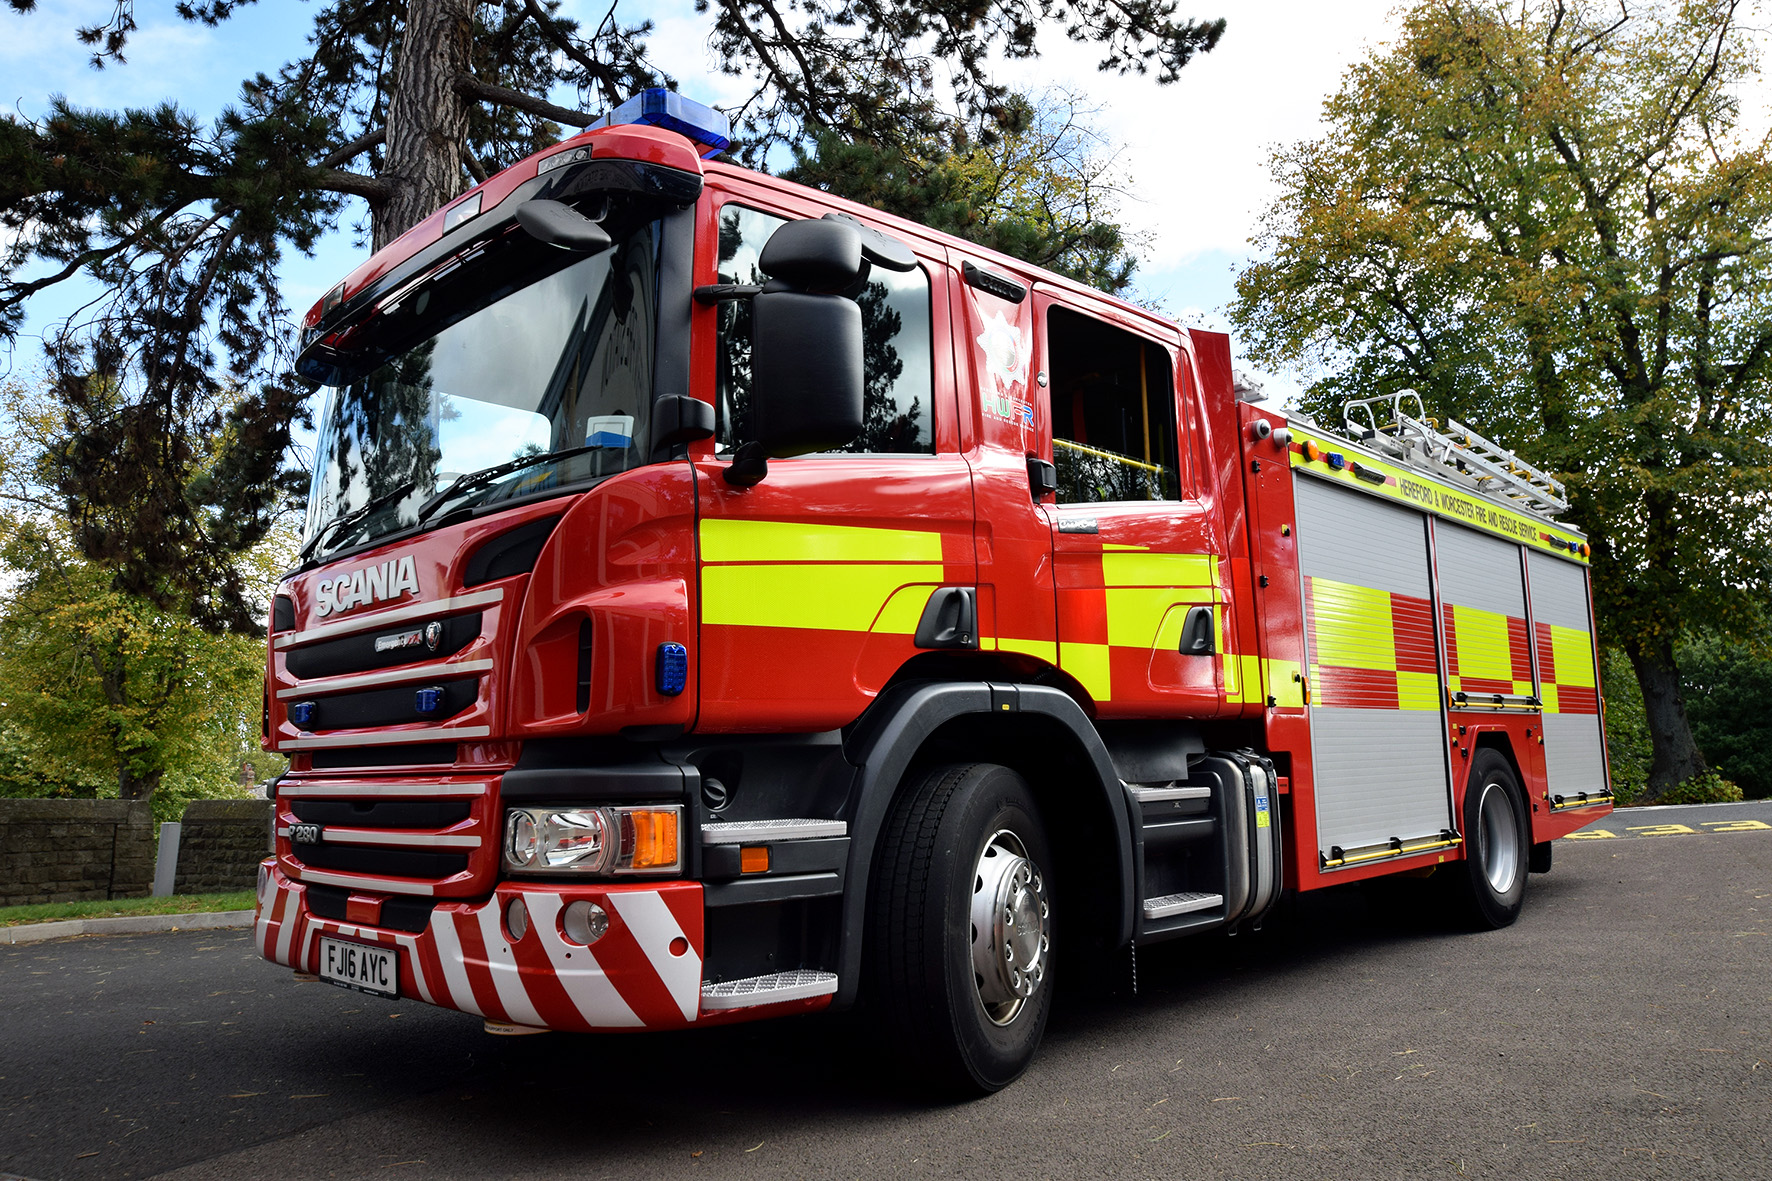 NEWS | Fire crews attend chimney fire that had spread to neighbouring property in Ledbury